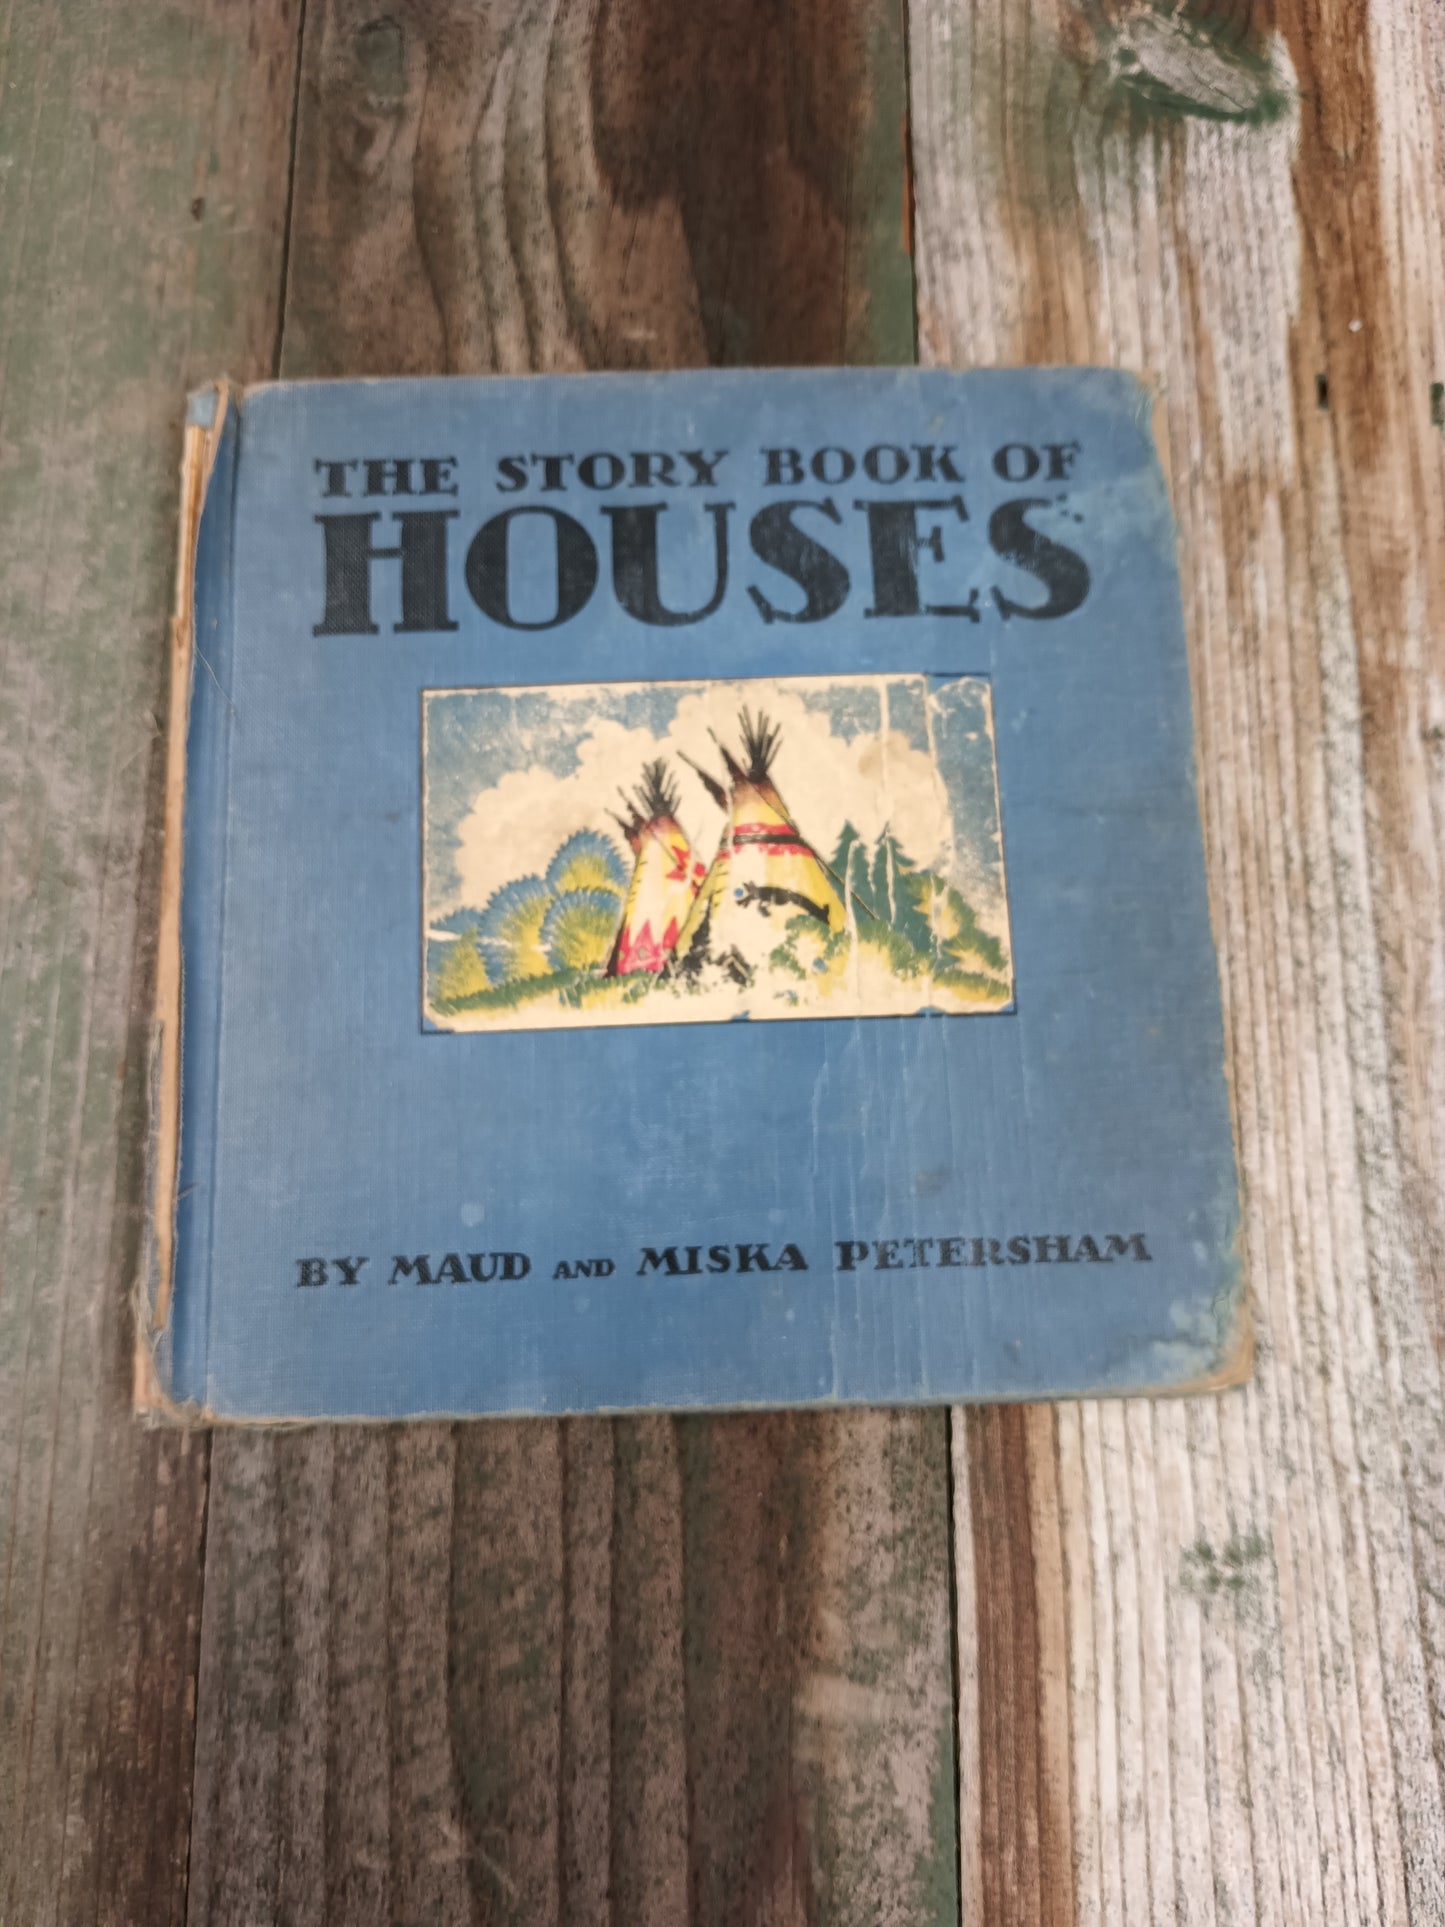 The Story Book of Houses